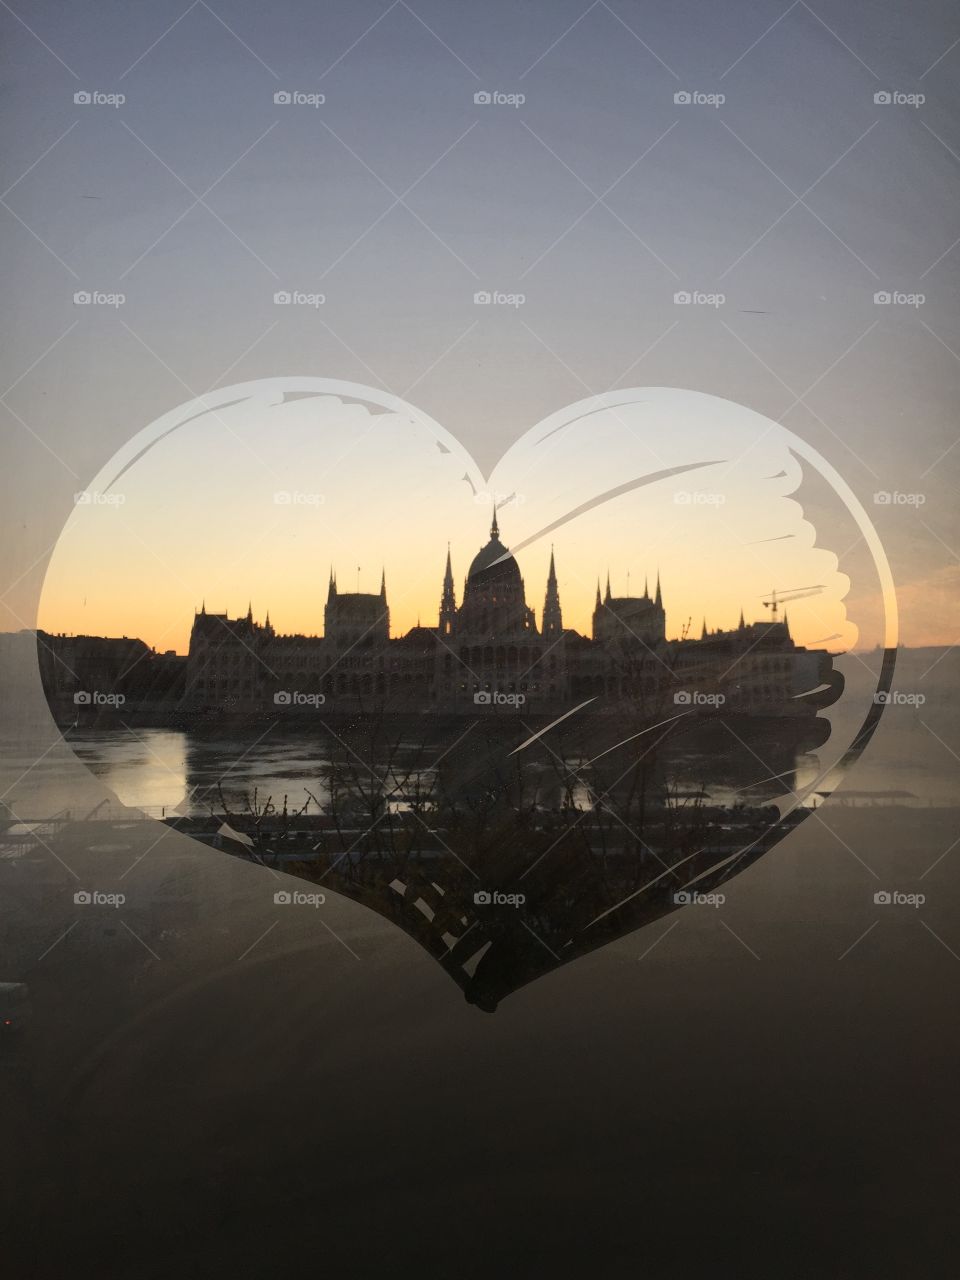 Hungarian Parliament building (Country House) at sunrise from across the Danube. 